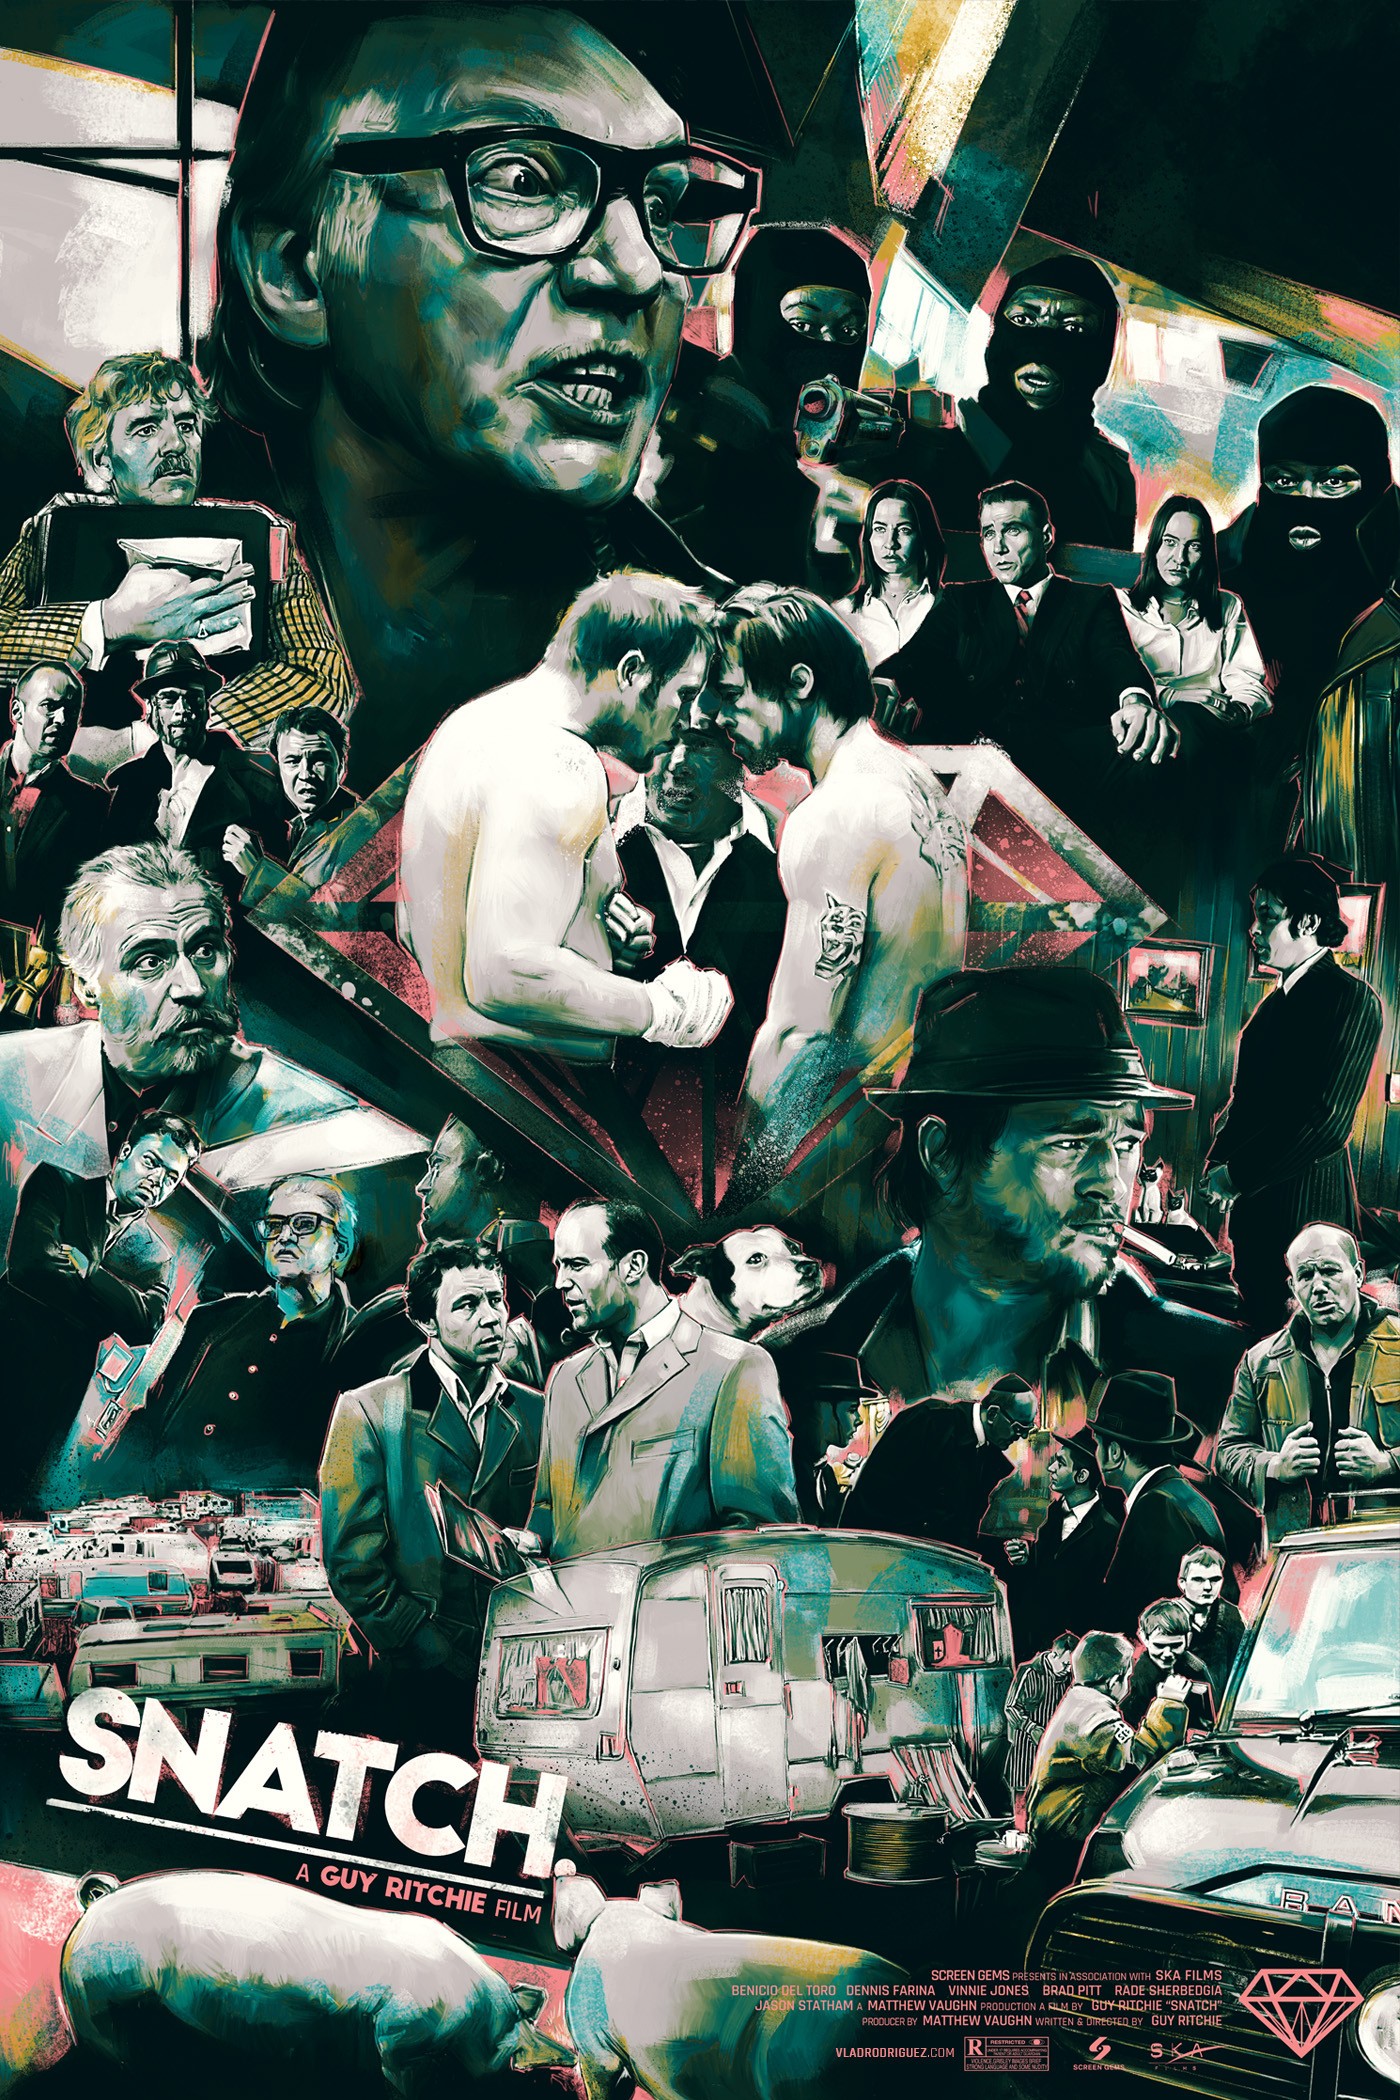 Guy Ritchie, Movies, Film posters, Snatch Wallpaper